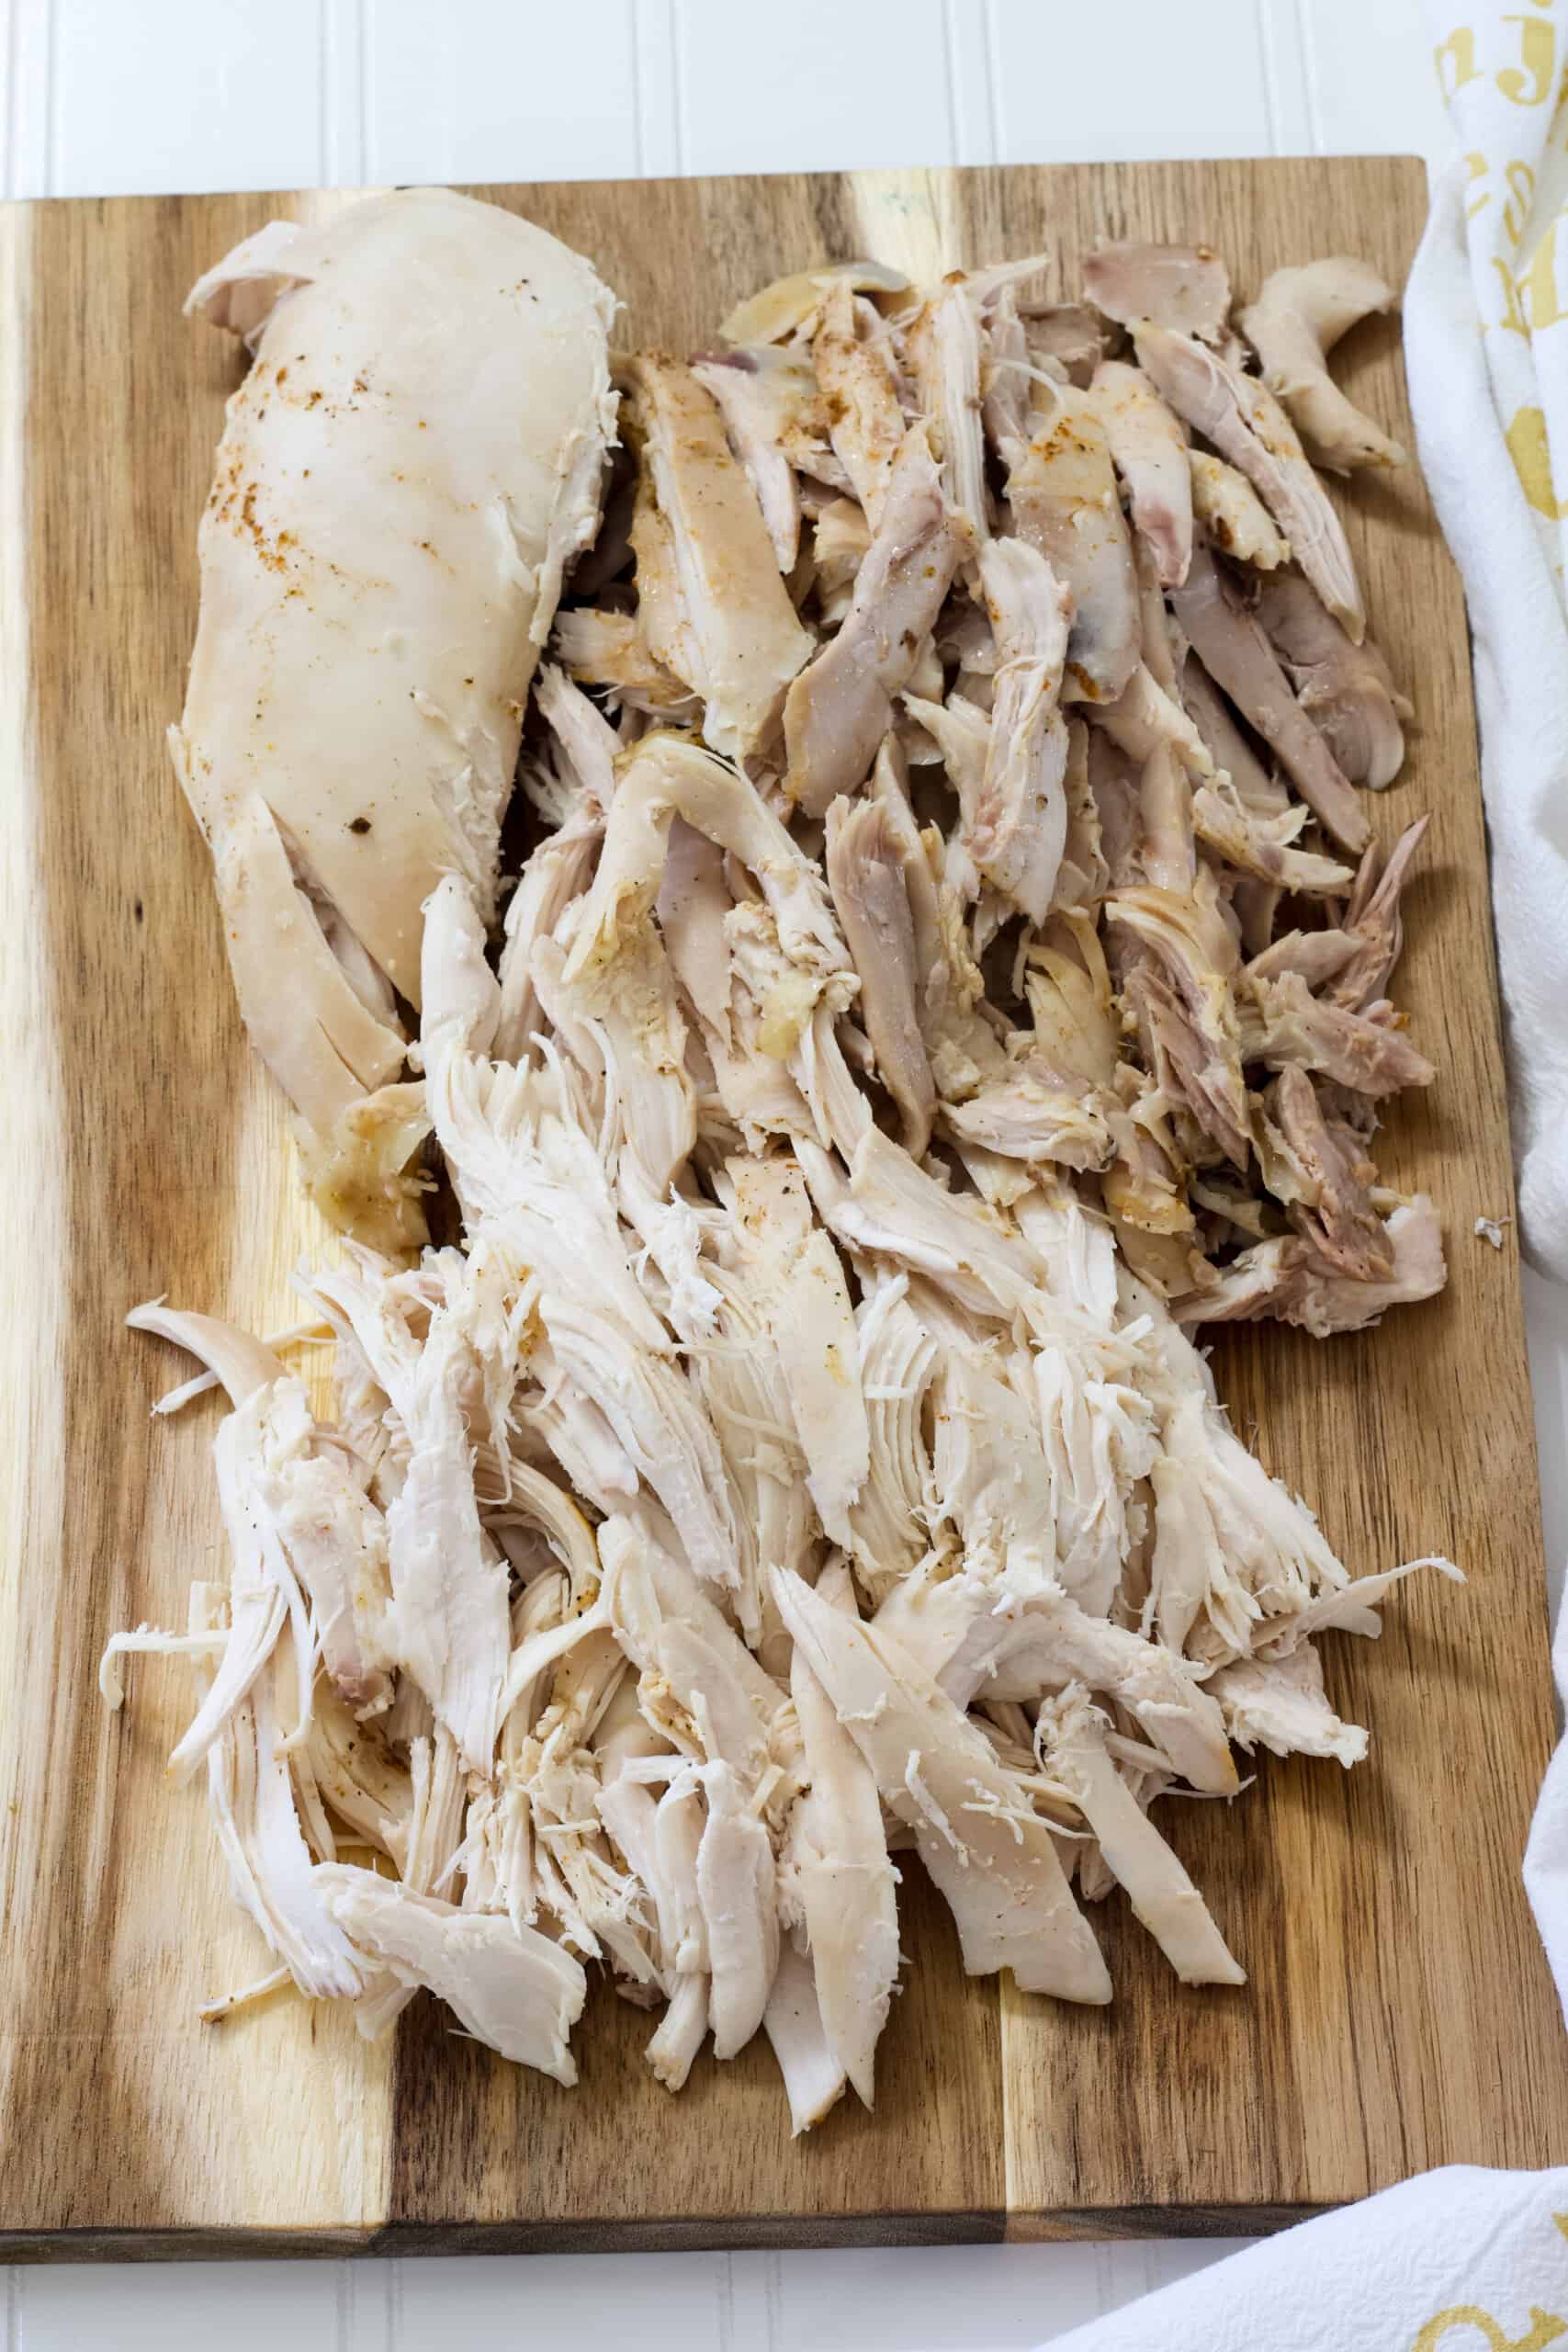 Vertical shot of shredded white and brown meat chicken on a wooden cutting board.